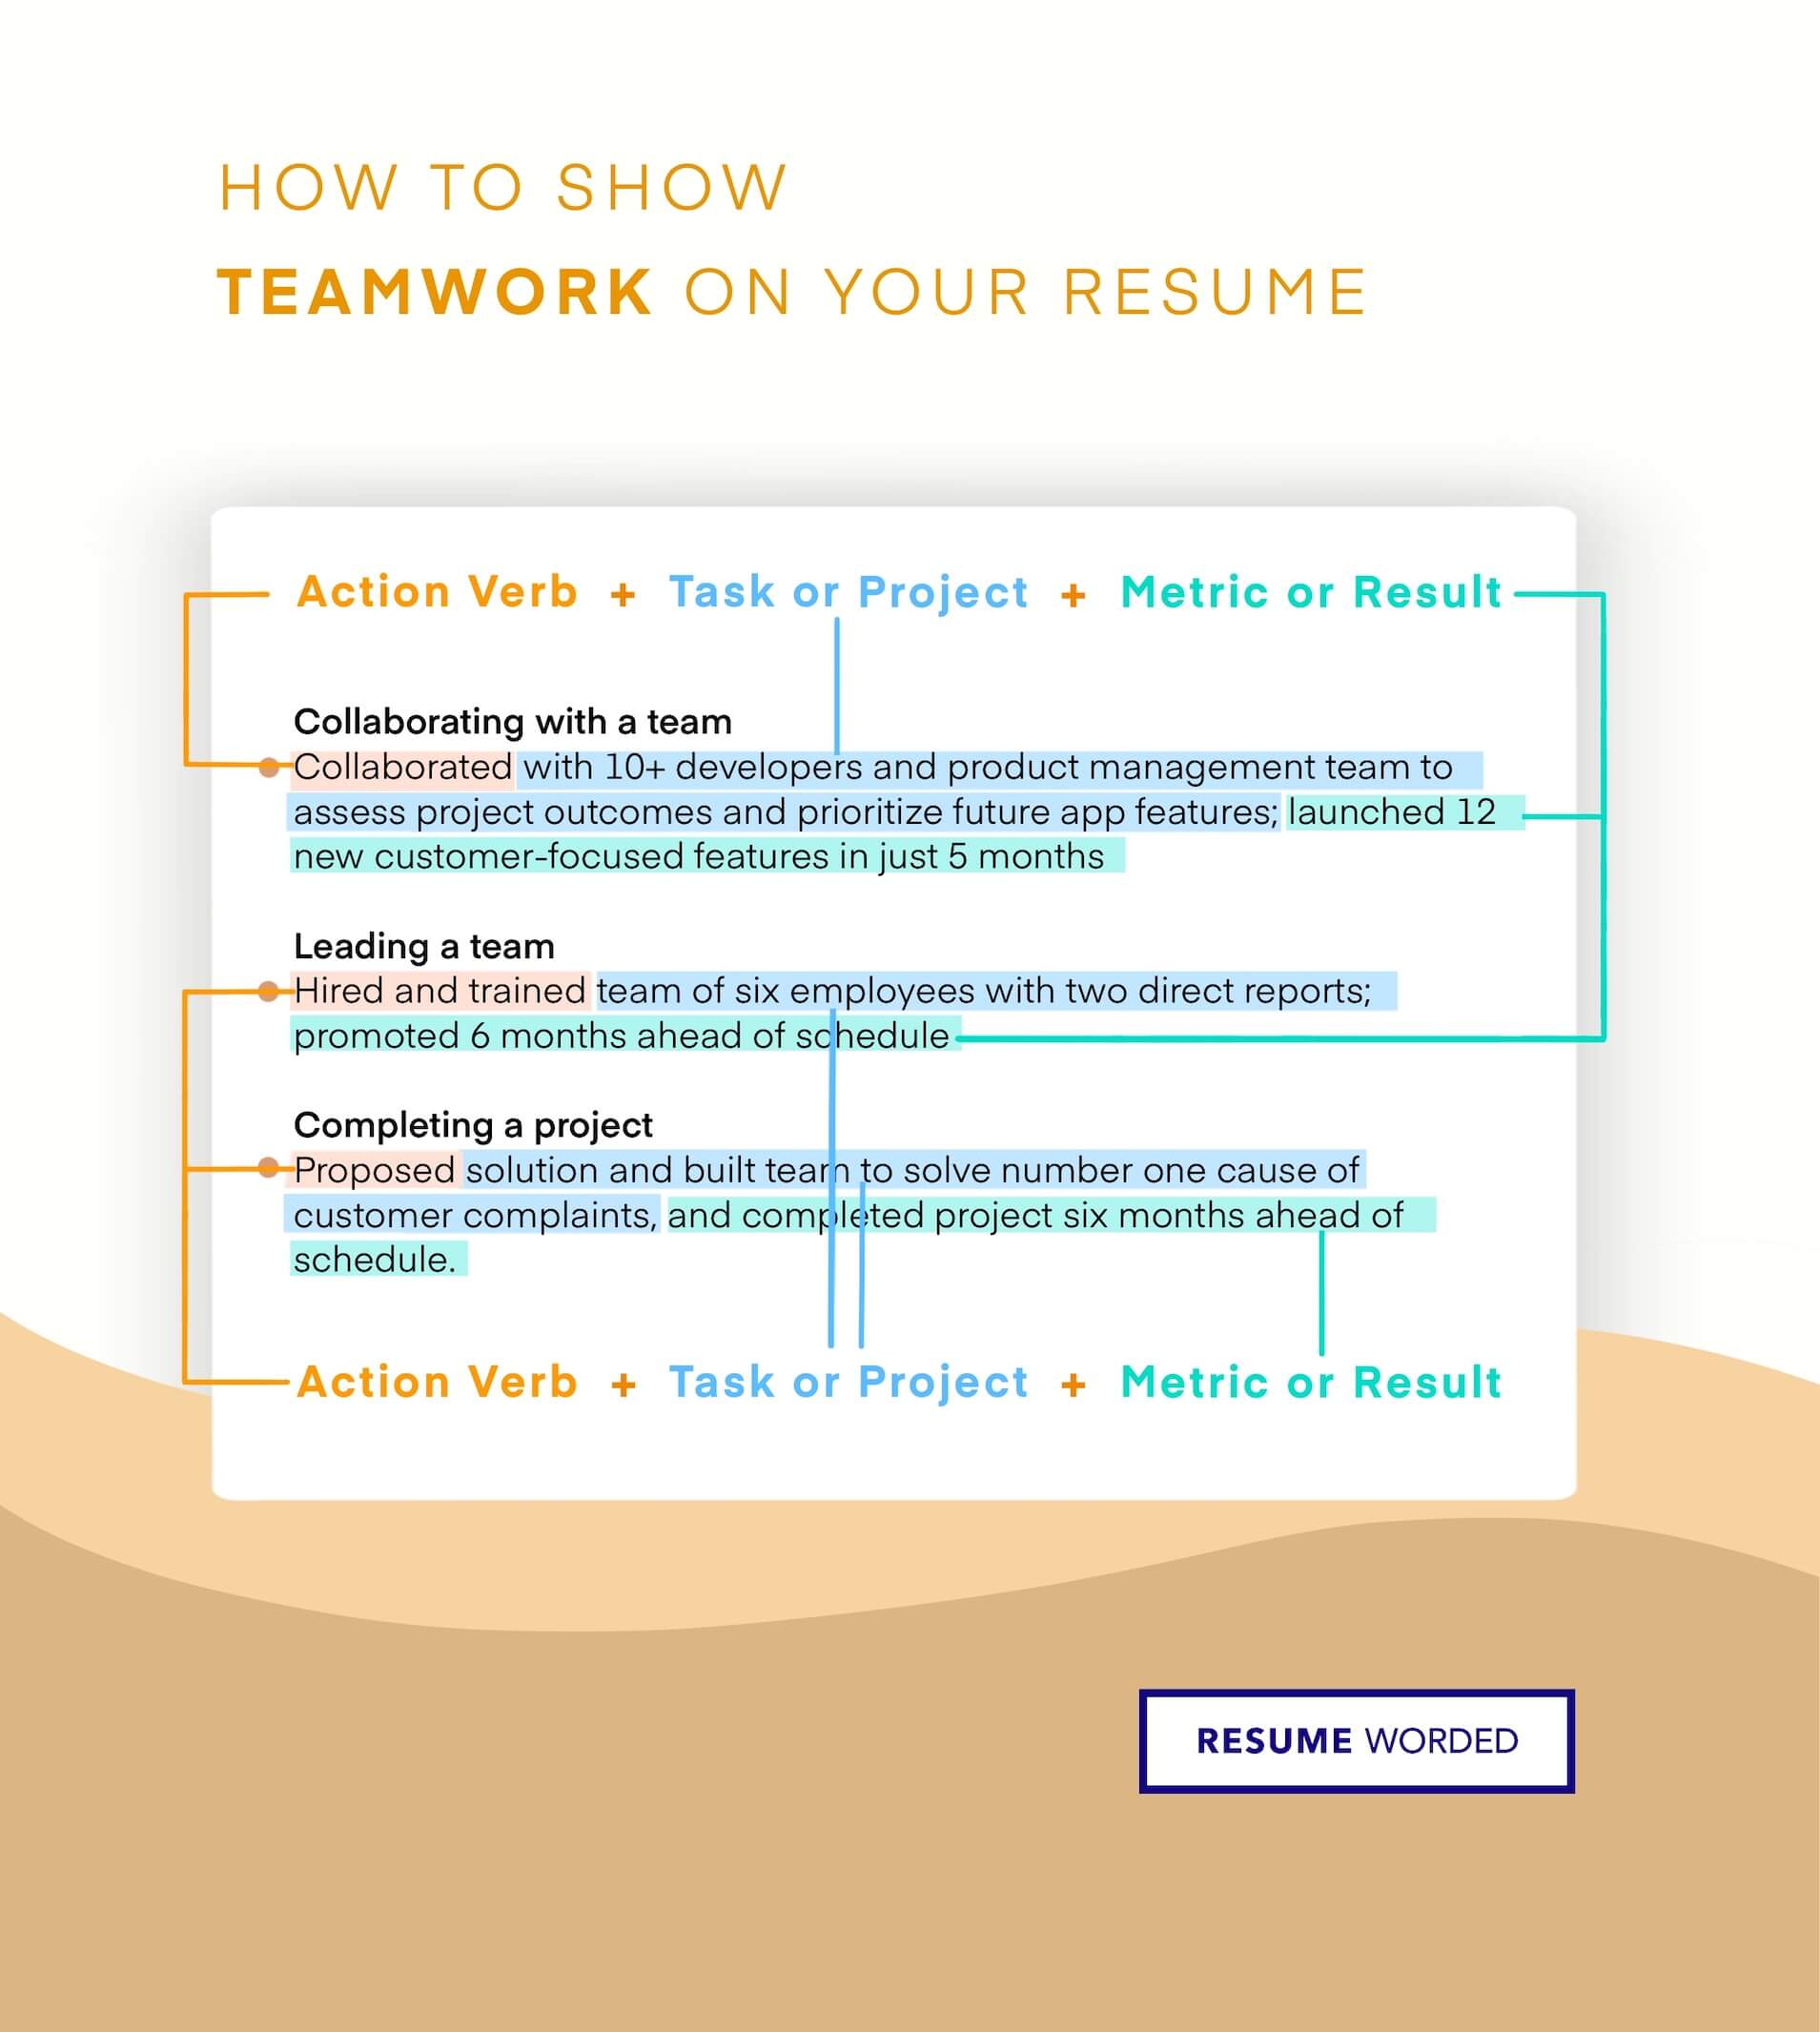 Highlight your ability to collaborate effectively with others in the workplace - Digital Media Specialist Resume